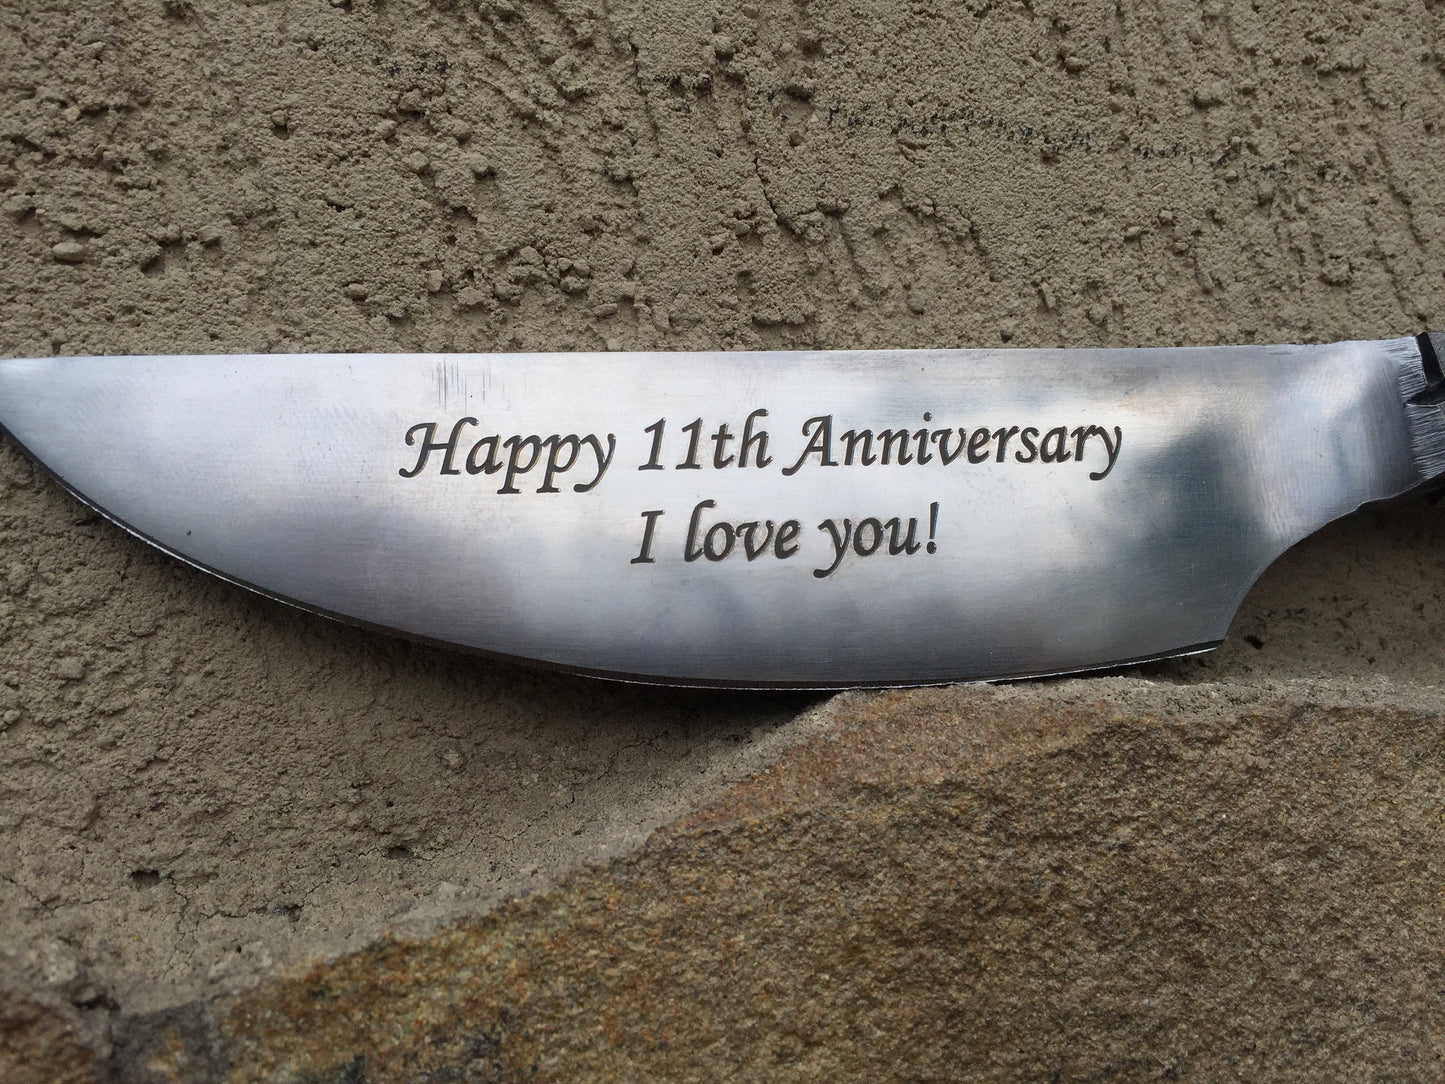 Steel gifts for him -11th anniversary, steel gifts, steel anniversary gifts, railroad spike knife, steel art,steel anniversary gifts for men